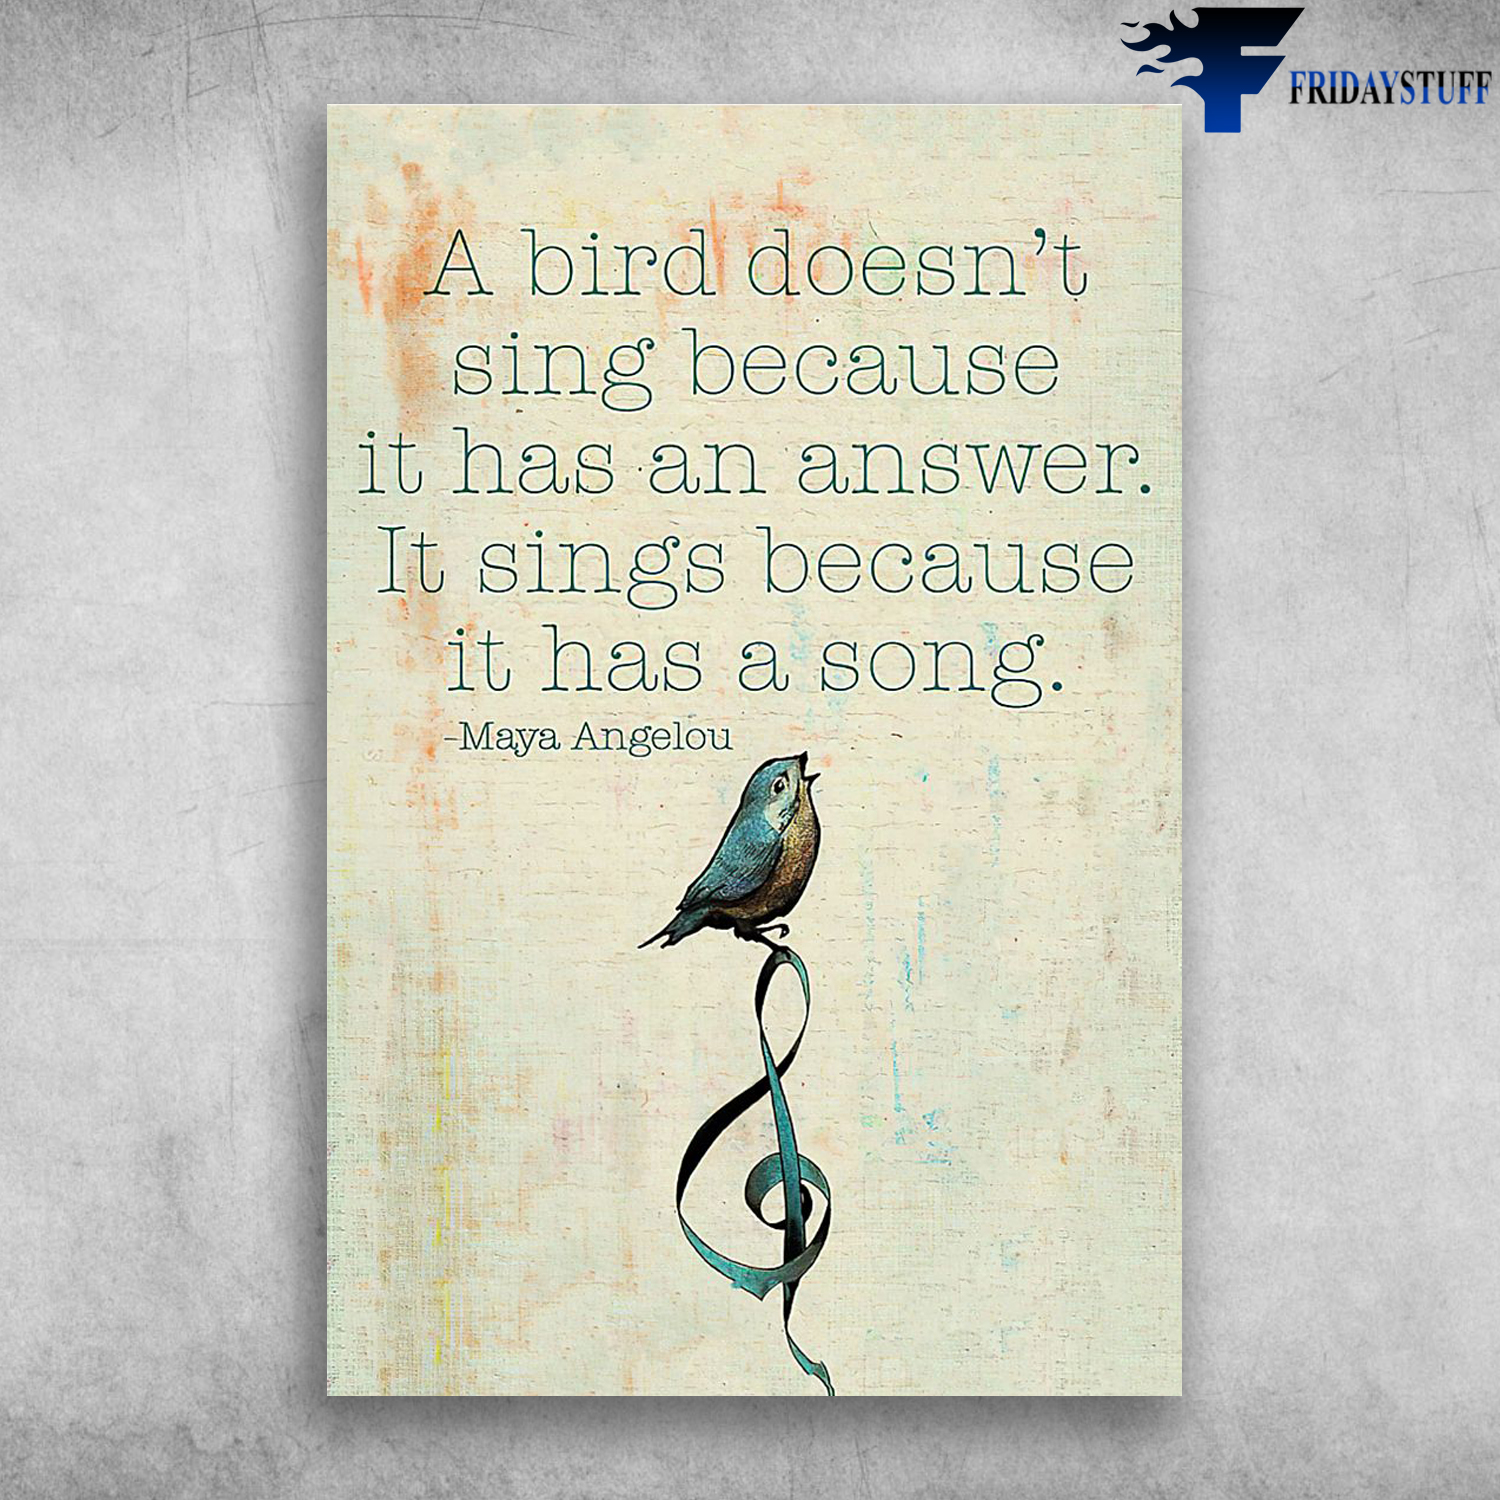 Maya Angelou - A Bird Doesn’t Sing Because It Has an Answer, It Sings Because It Has a Song